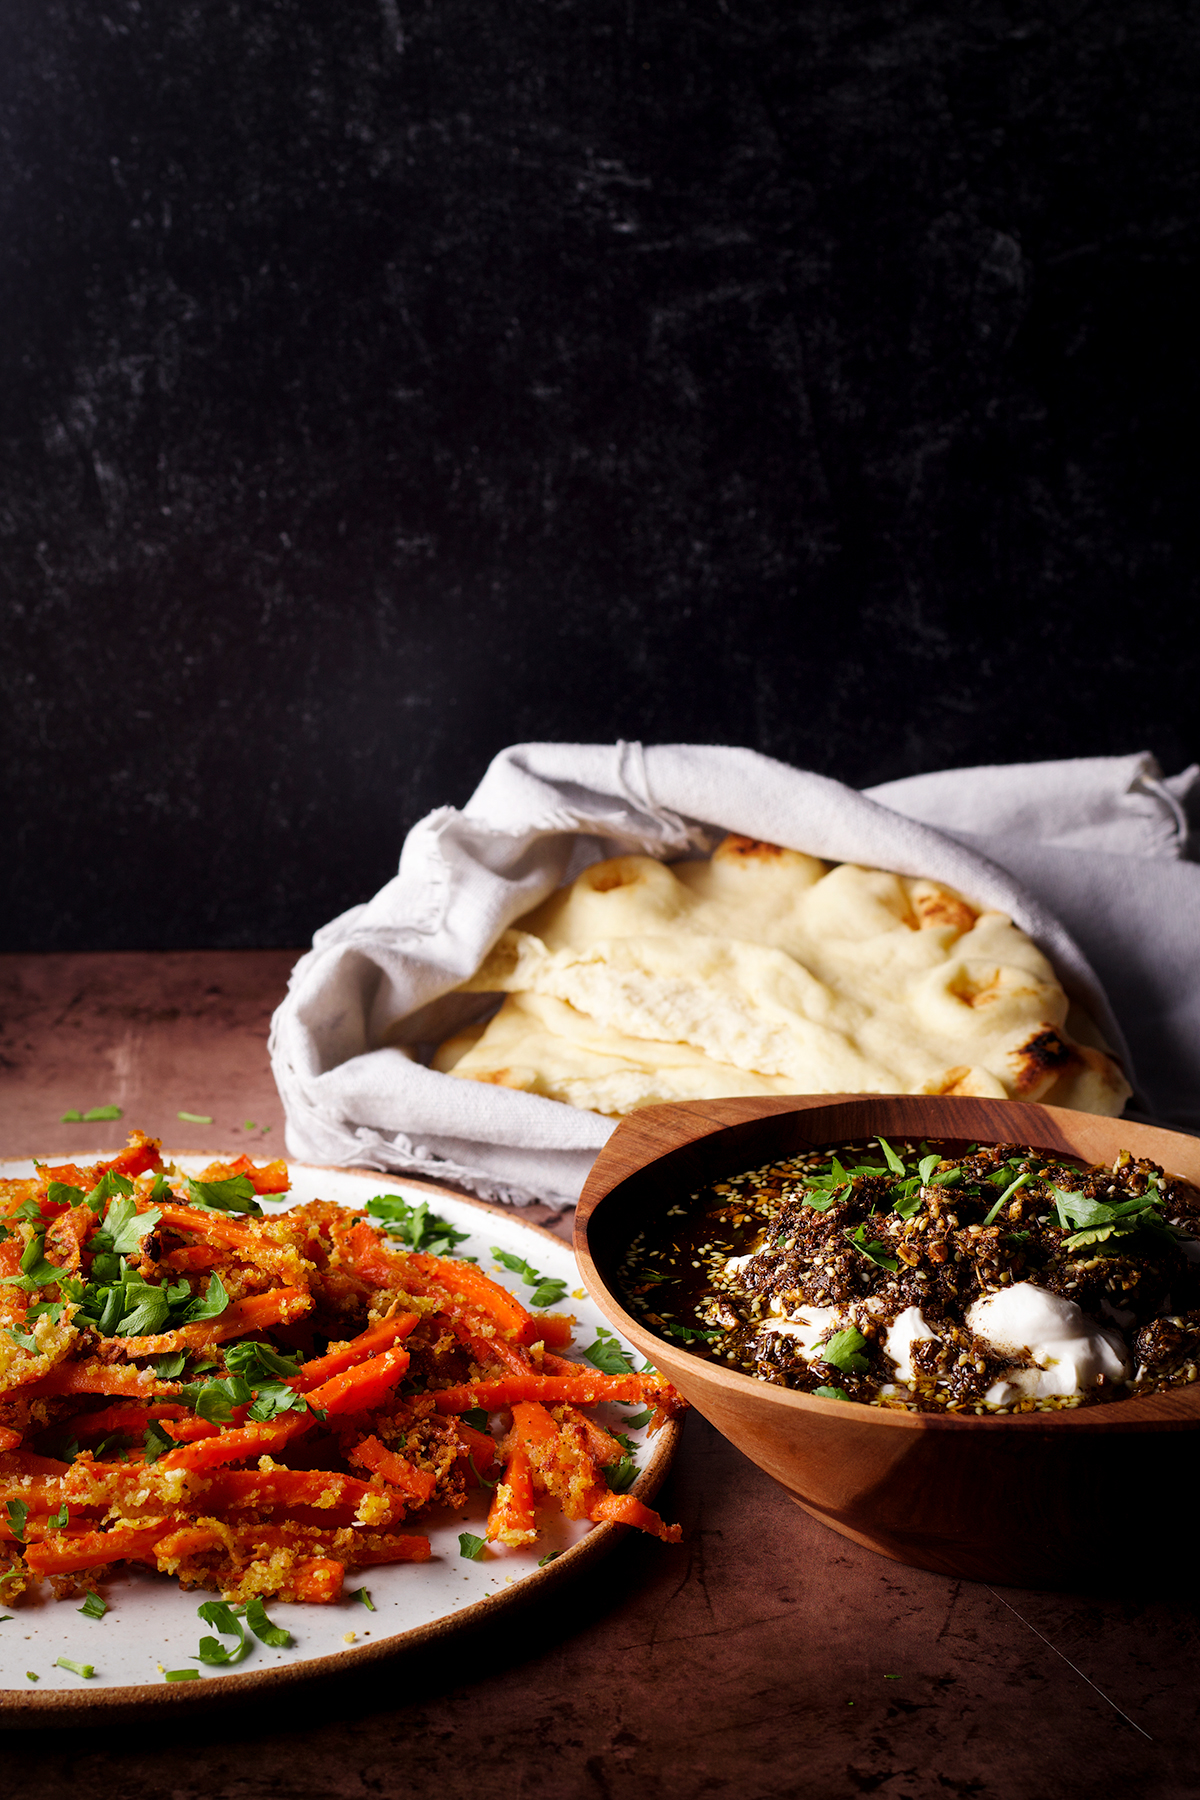 A bowl of za'atar labneh sitting next to a plate filled with carrot fries and a stack of buttered naan.